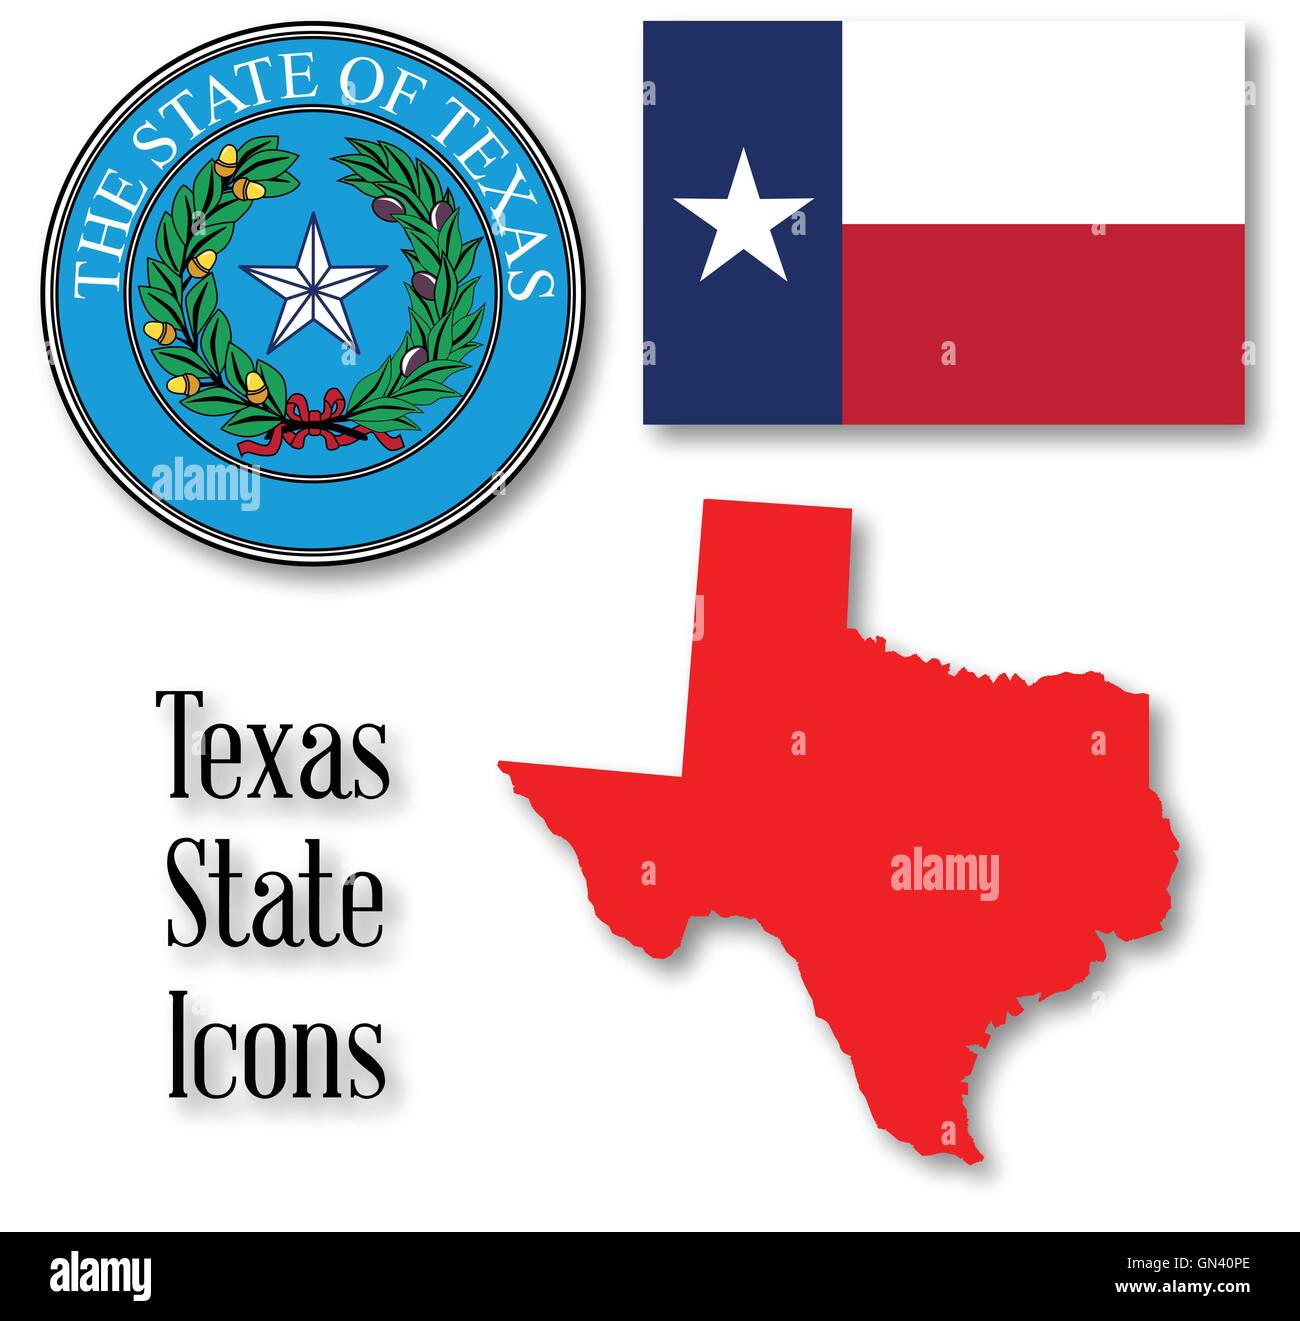 Texas State Icons Stock Vector